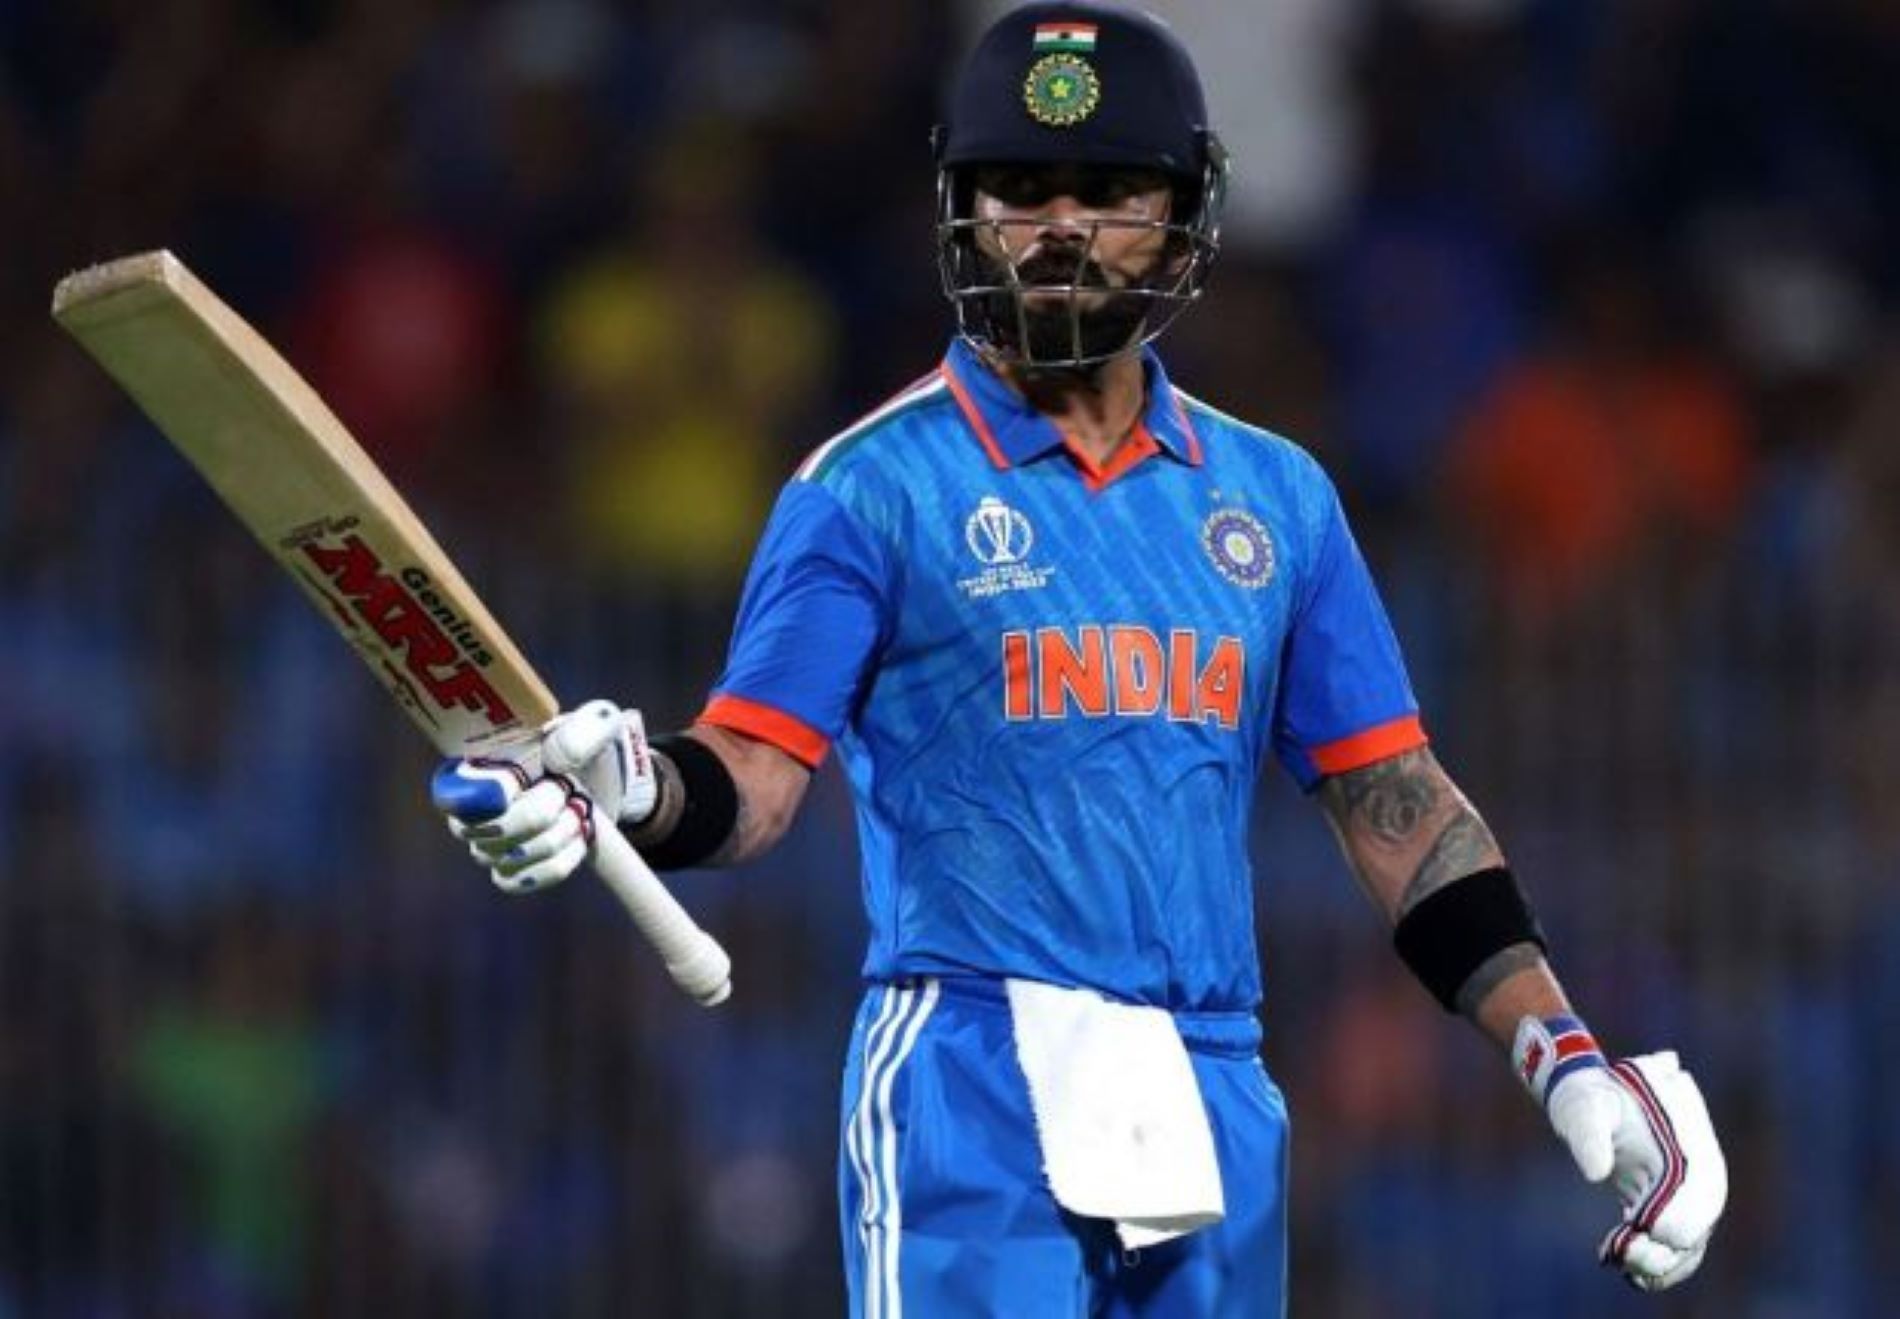 Virat Kohli has been at his usual best thus far in the World Cup.